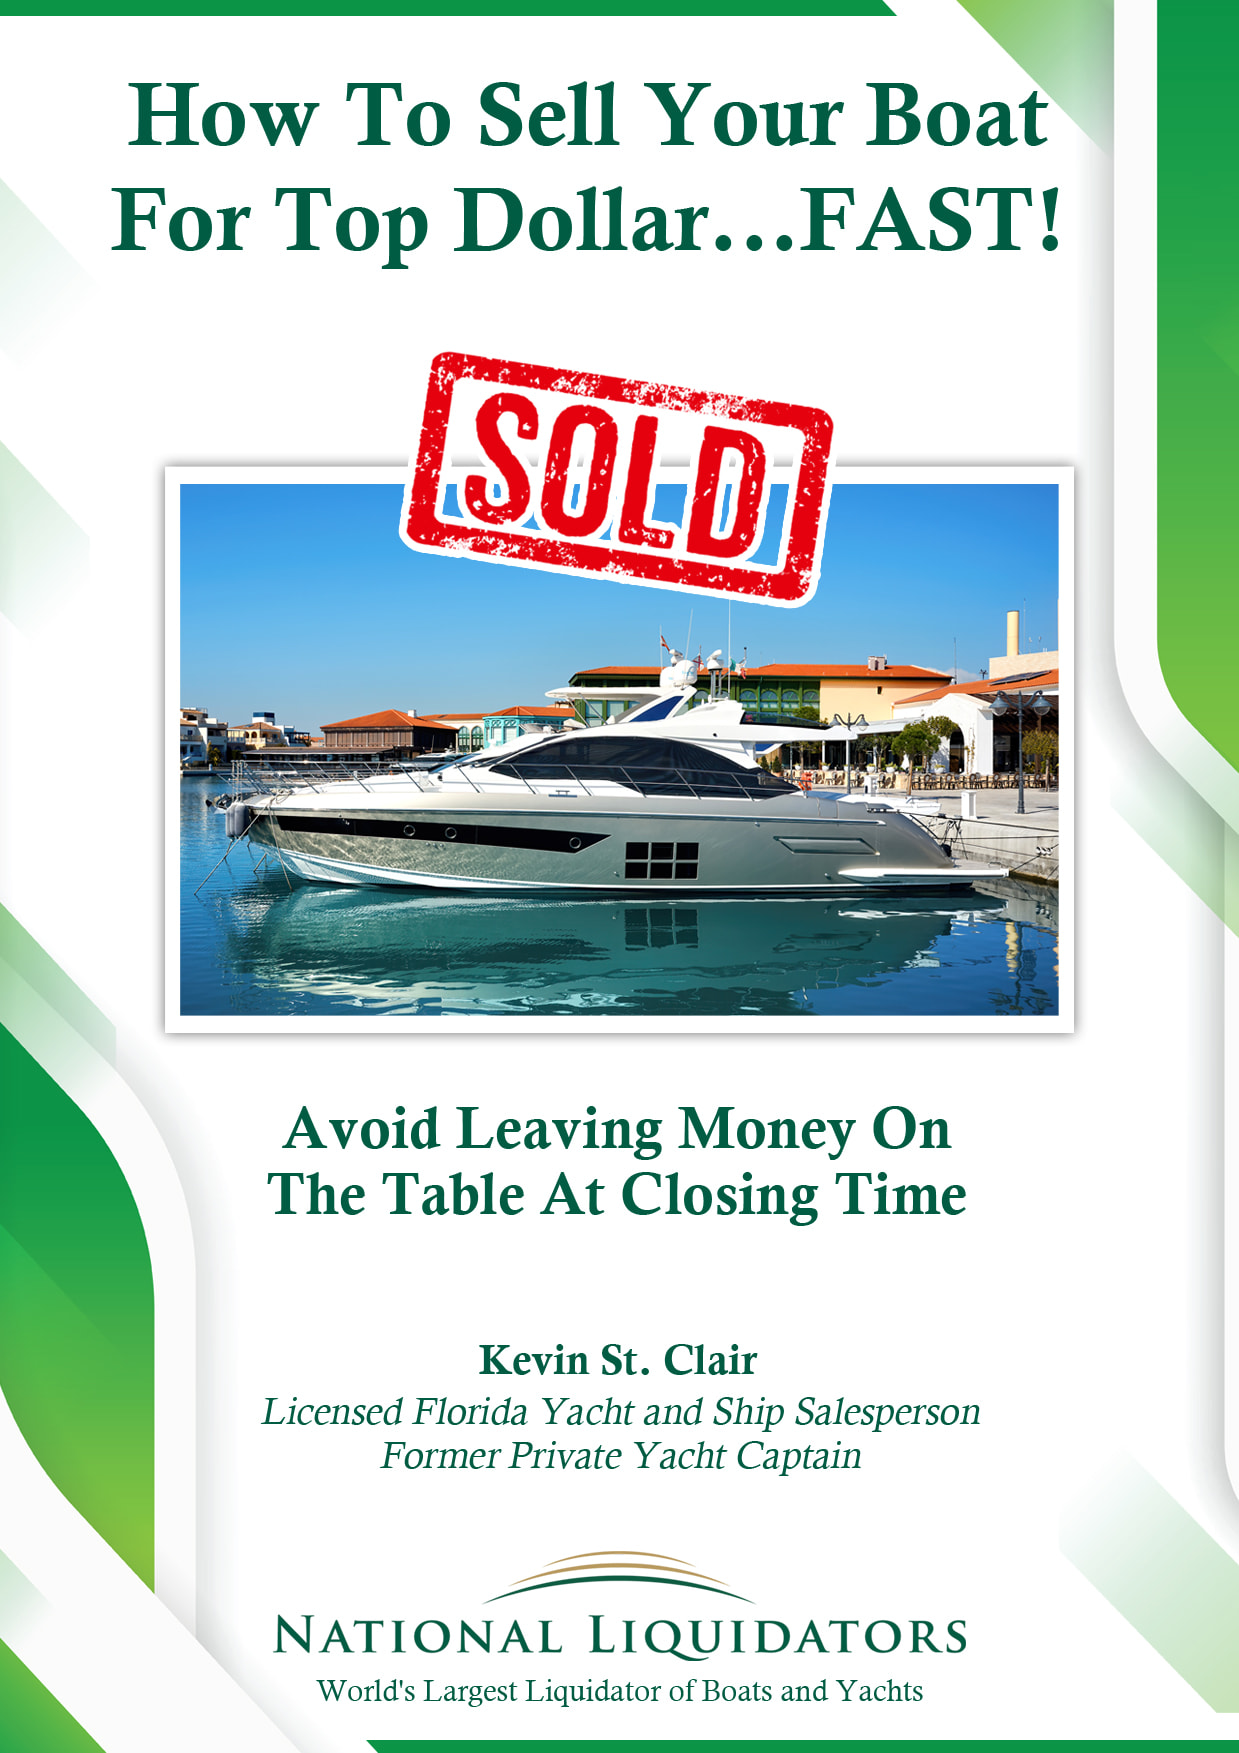 Expert Boat-Dealer Kevin St. Clair Pens Amazon Best-Seller, "How To Sell Your Boat For Top Dollar…FAST!"